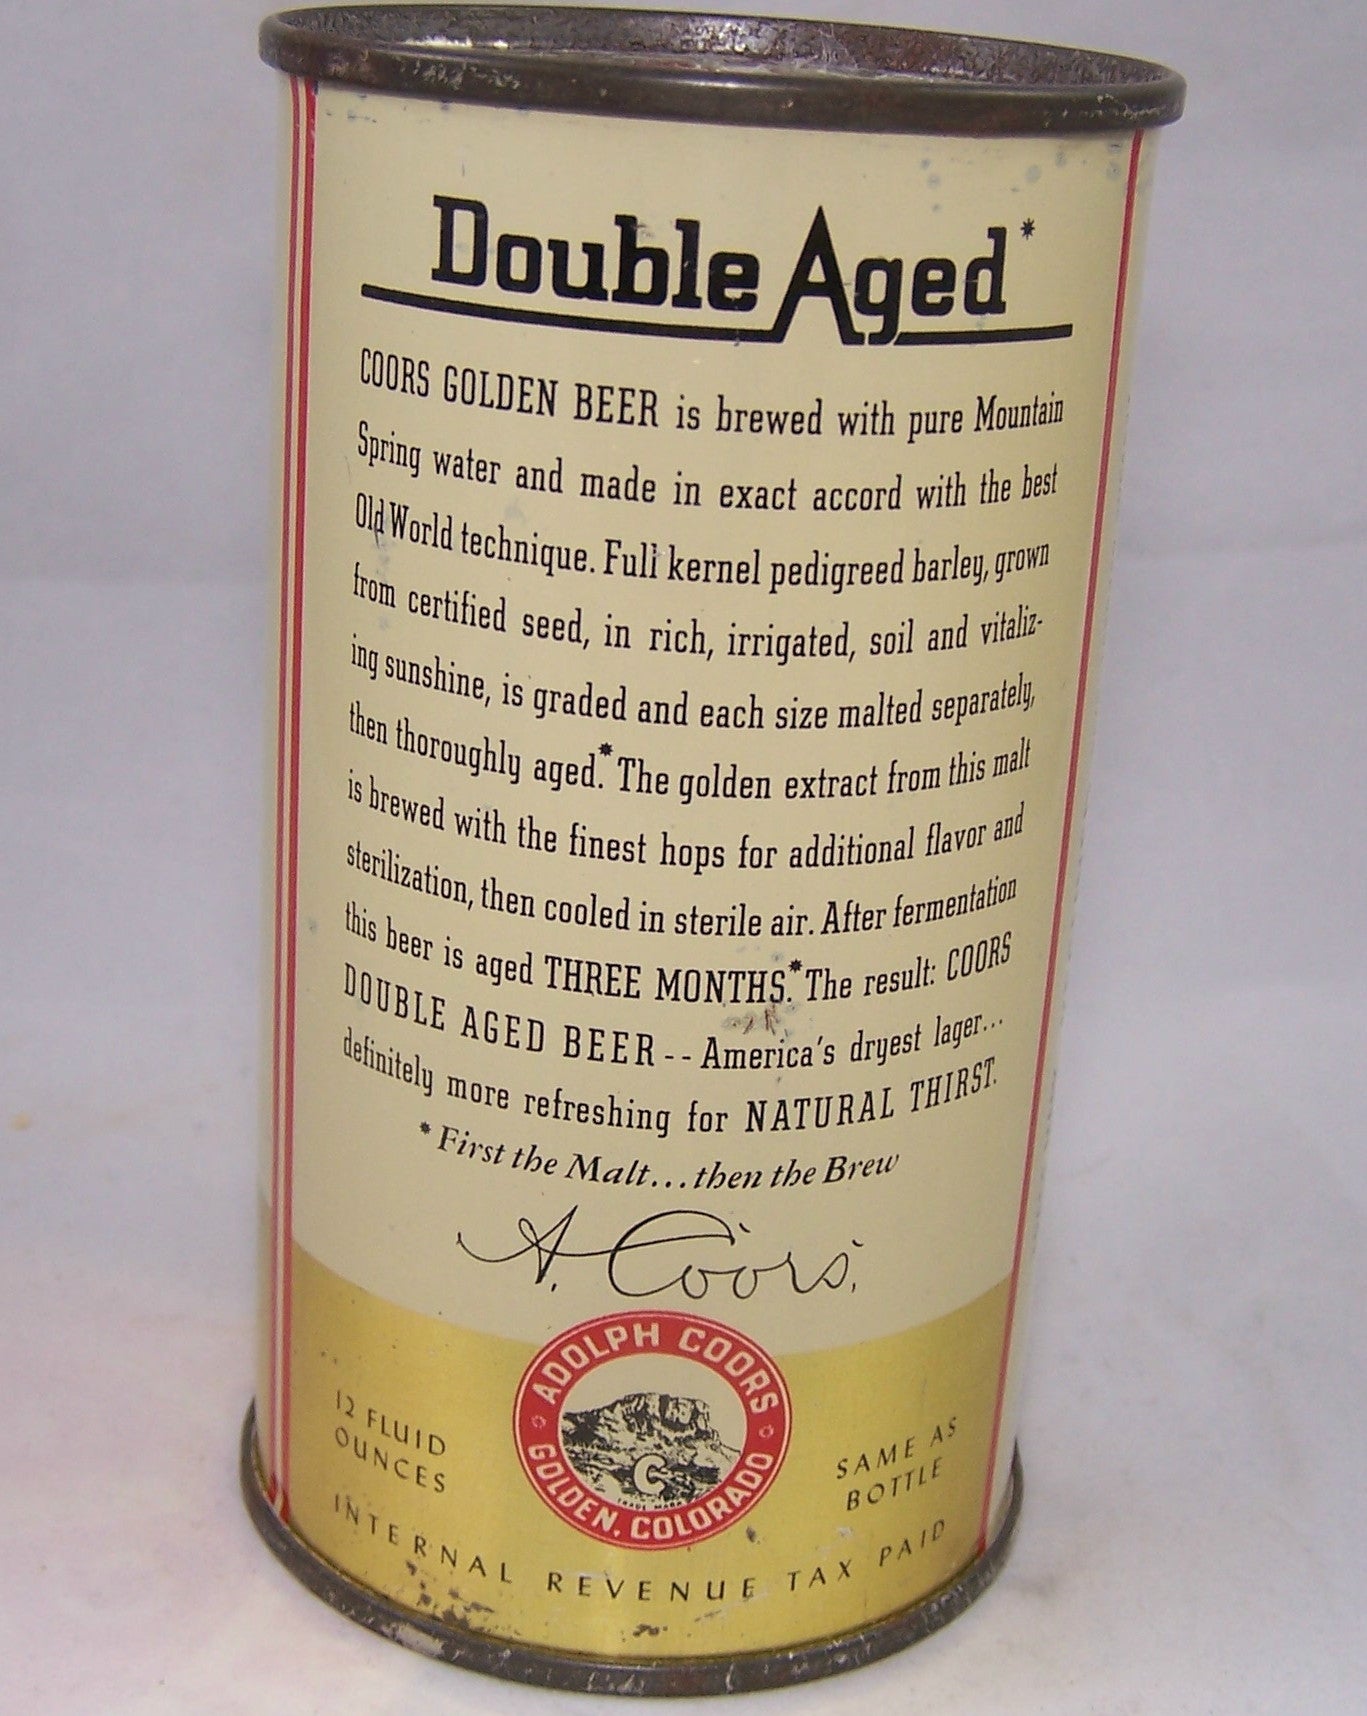 Coors Golden Double Aged, USBC 51-19, Grade 1/1- Sold on 04/02/17